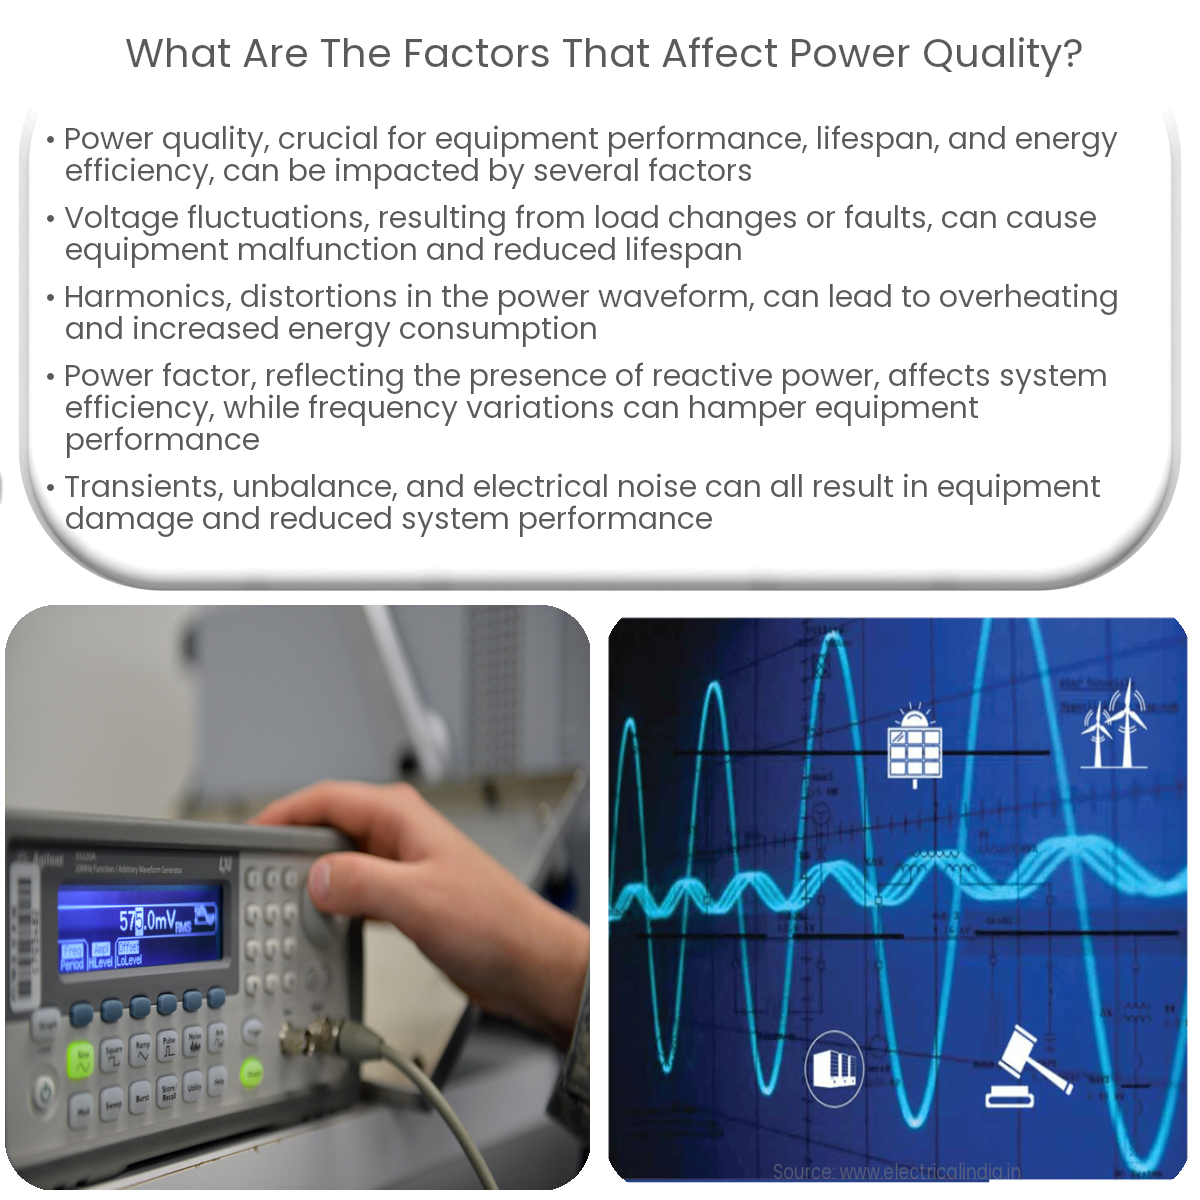 What are the factors that affect power quality?